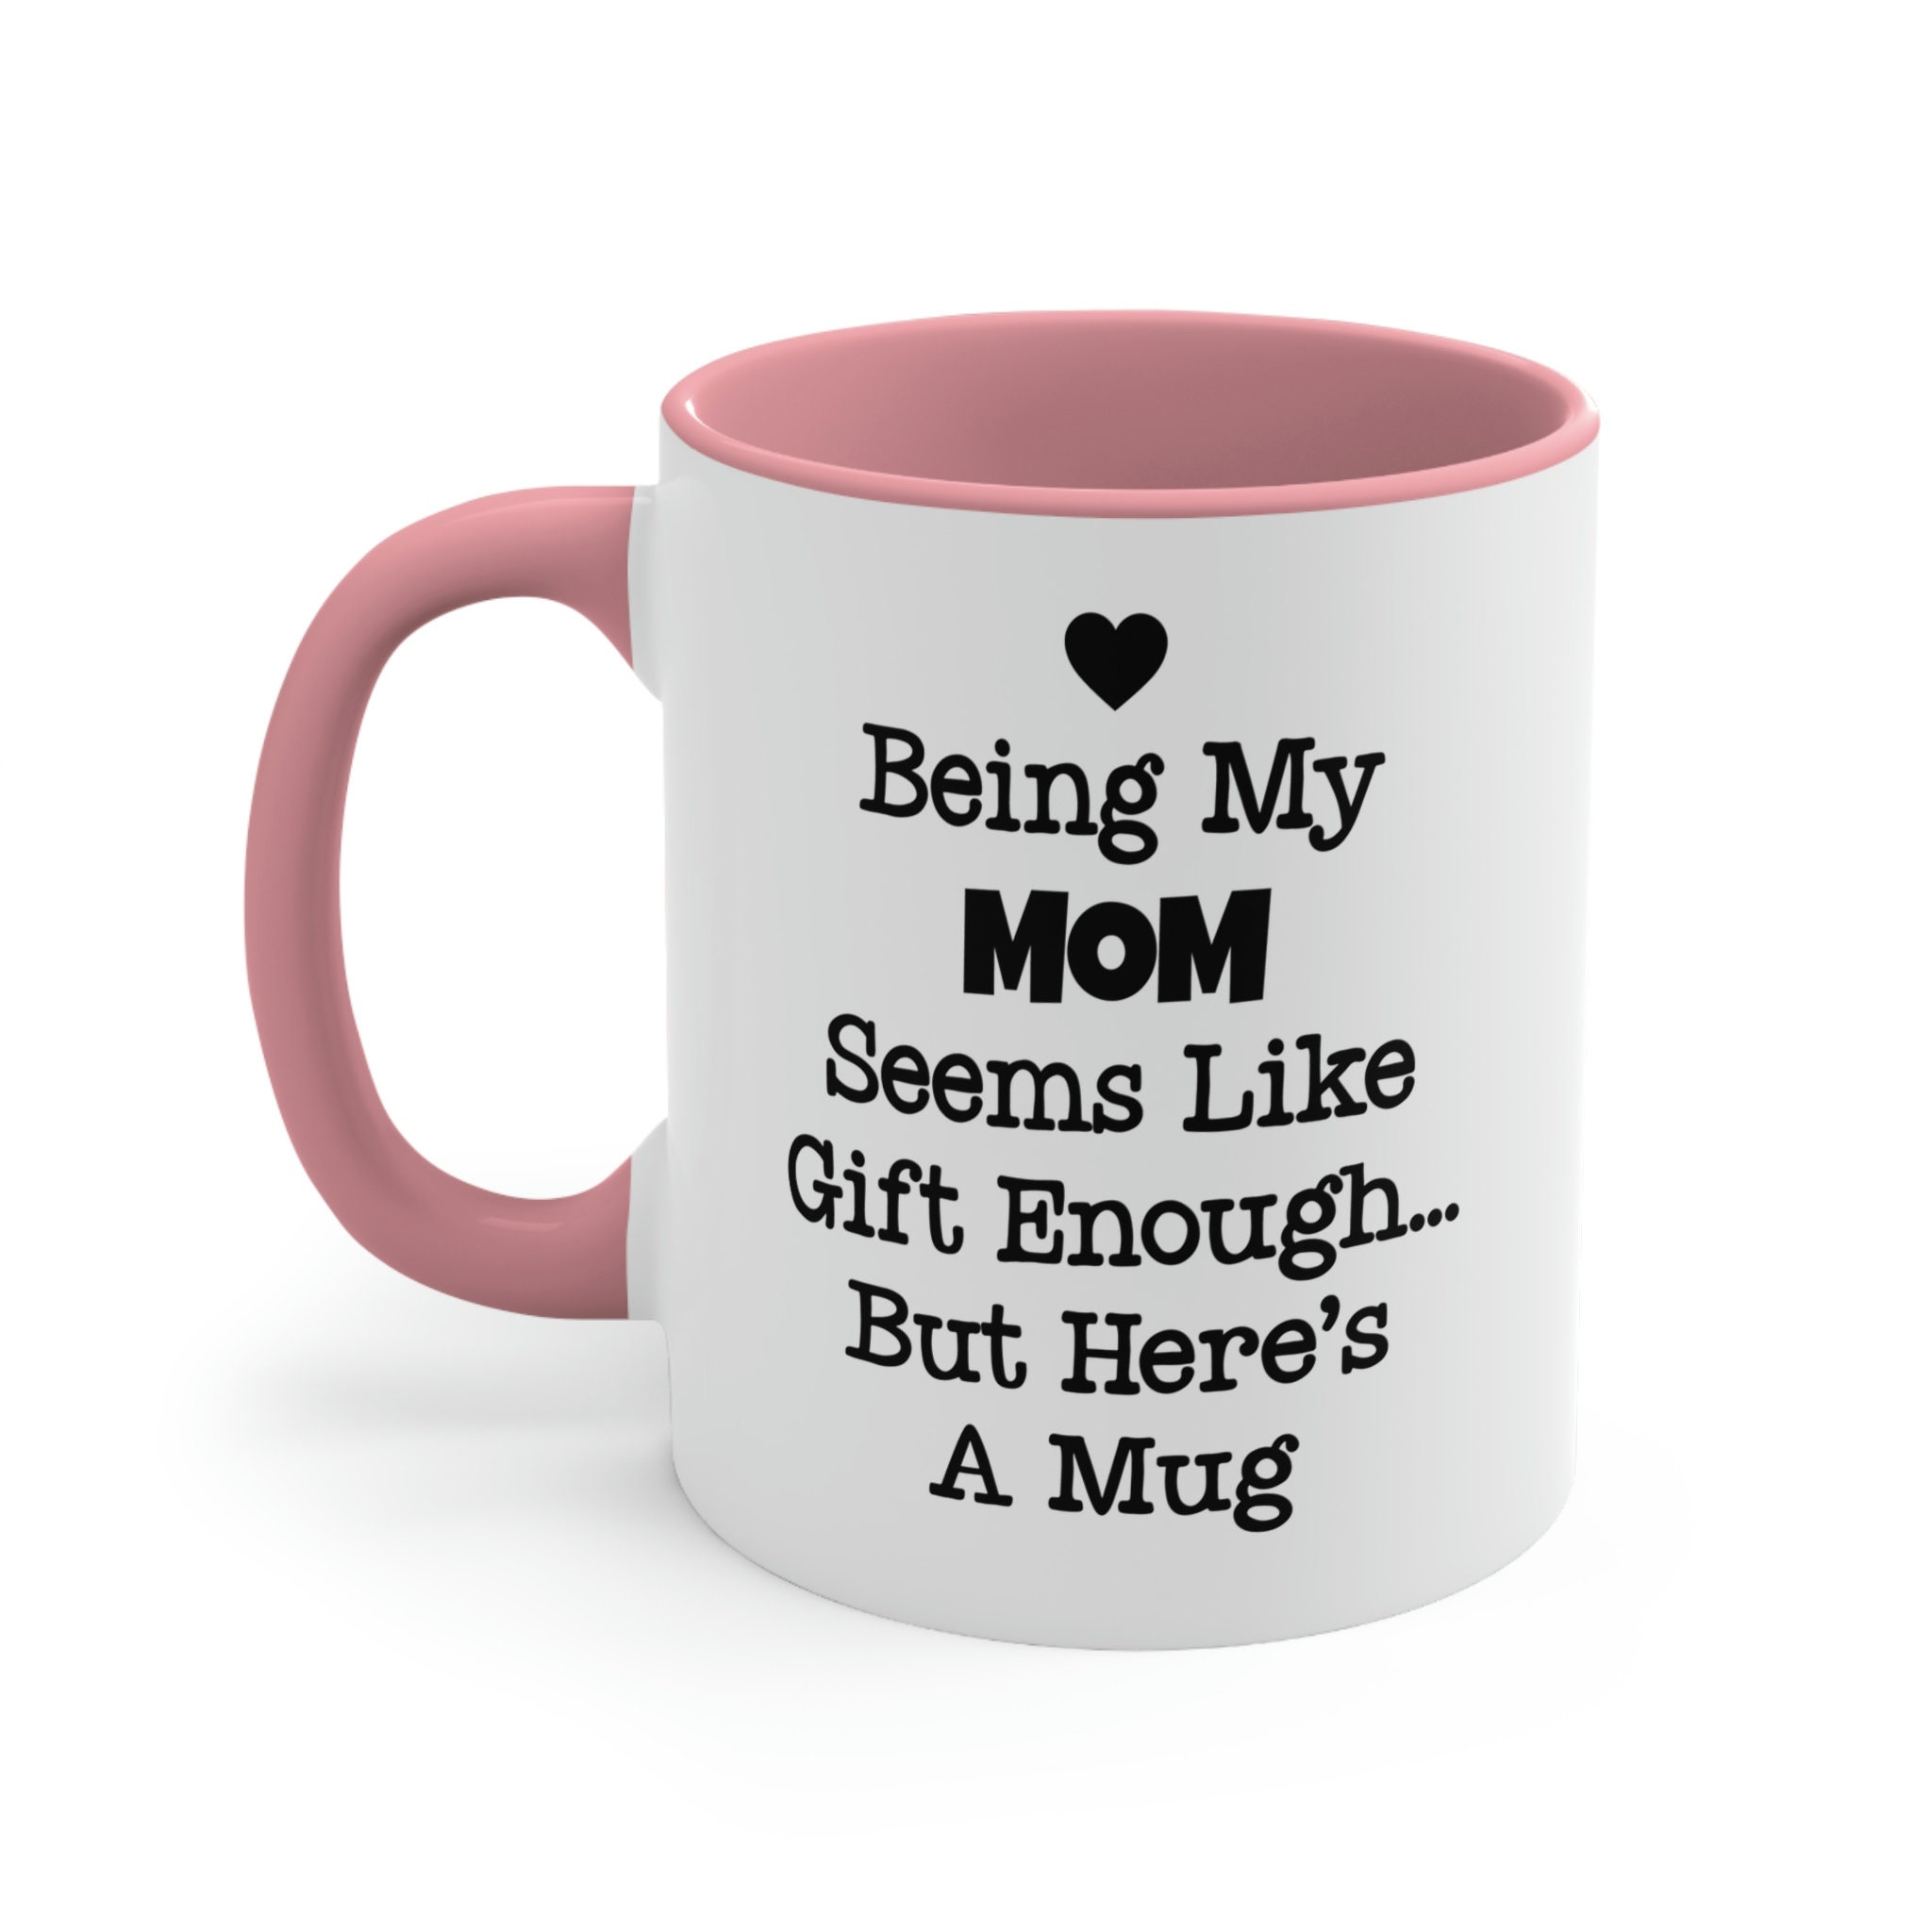 Funny Mom Gifts, Good Moms Let You Lick the Beaters Mug, Funny Mom Mug,  Mothers Day Gift Ideas, Funny Gifts for Mom, Watercolor Flowers Cup 